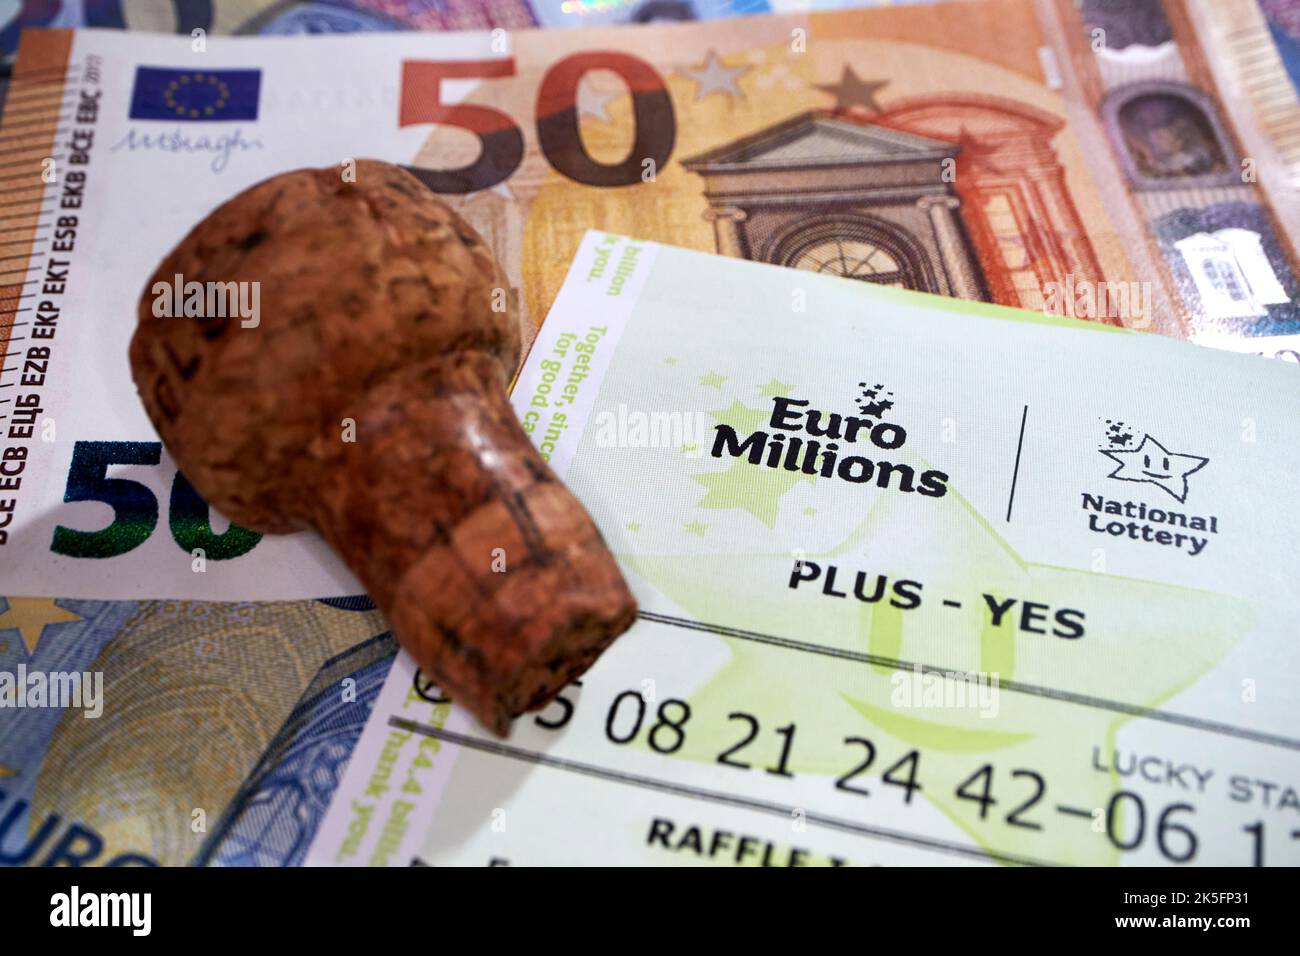 Irish national lottery euromillions lottery ticket with euros cash and champagne cork signifying winning ticket Stock Photo